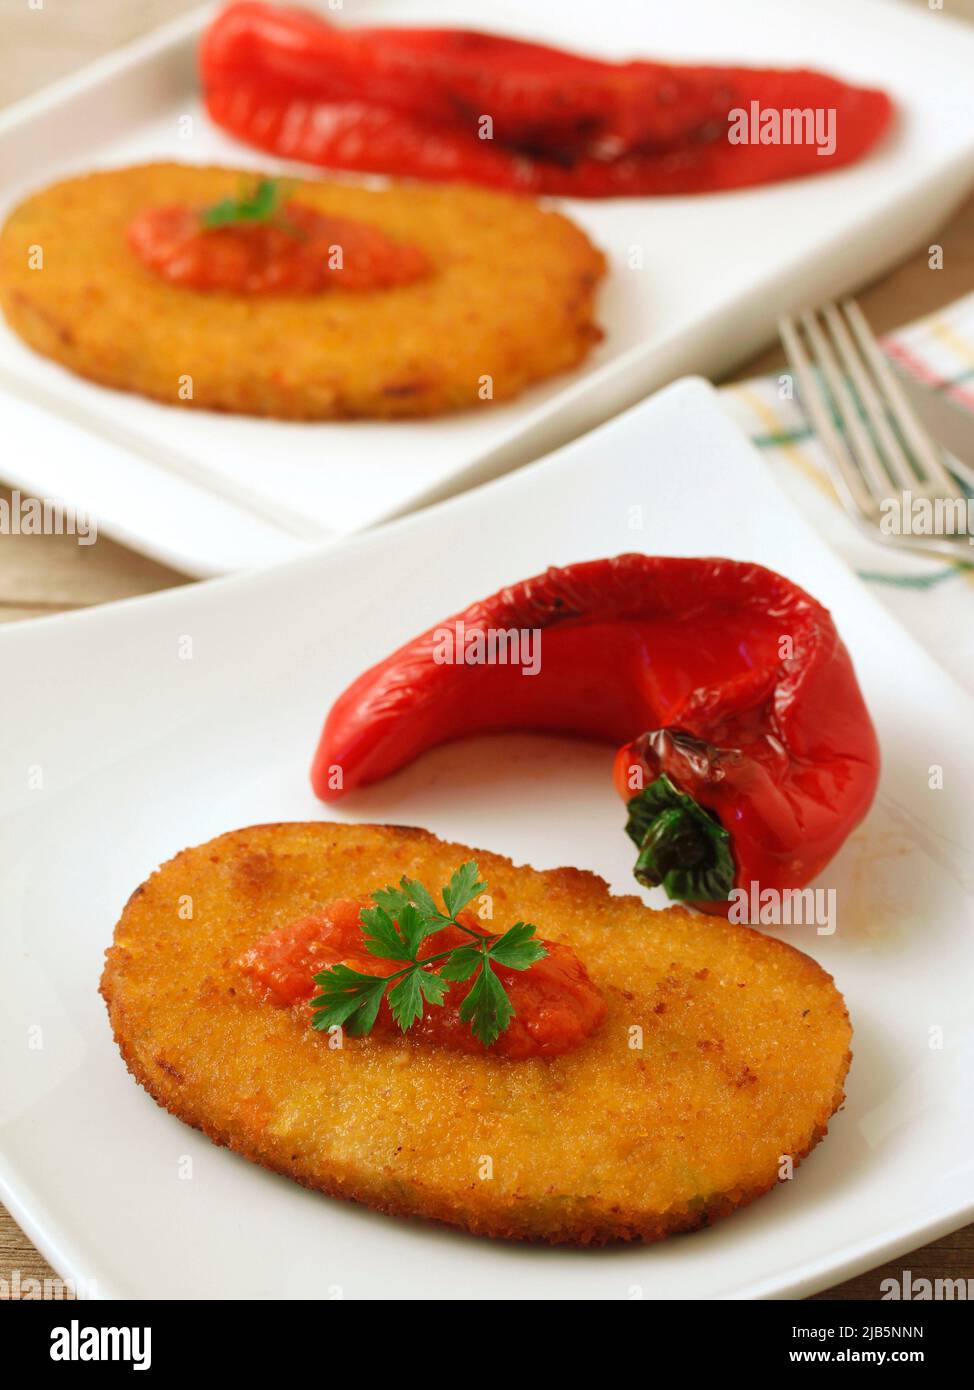 Vegetarian breaded, based on variety of veggies, with baked peppers. Stock Photo